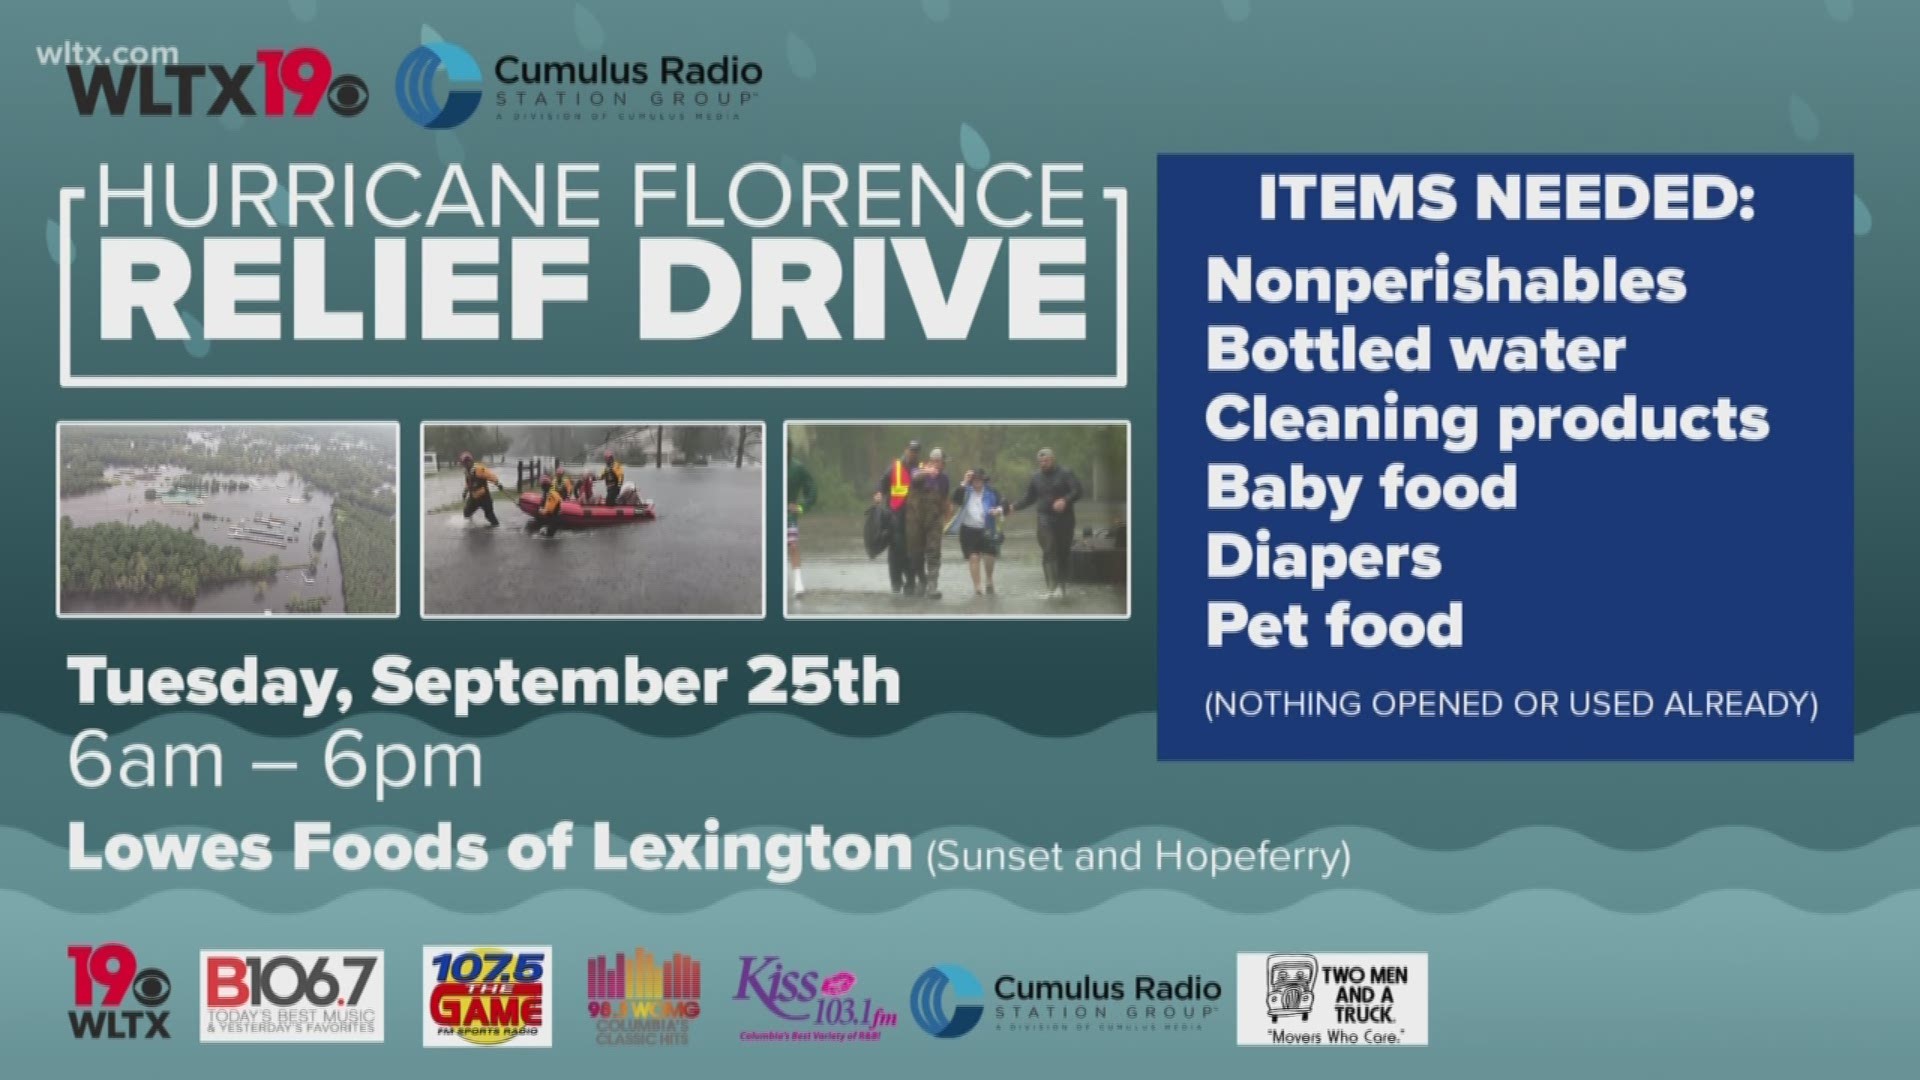 We're going to be collecting nonperishables, bottled water, cleaning products, baby food,diapers, and pet food.